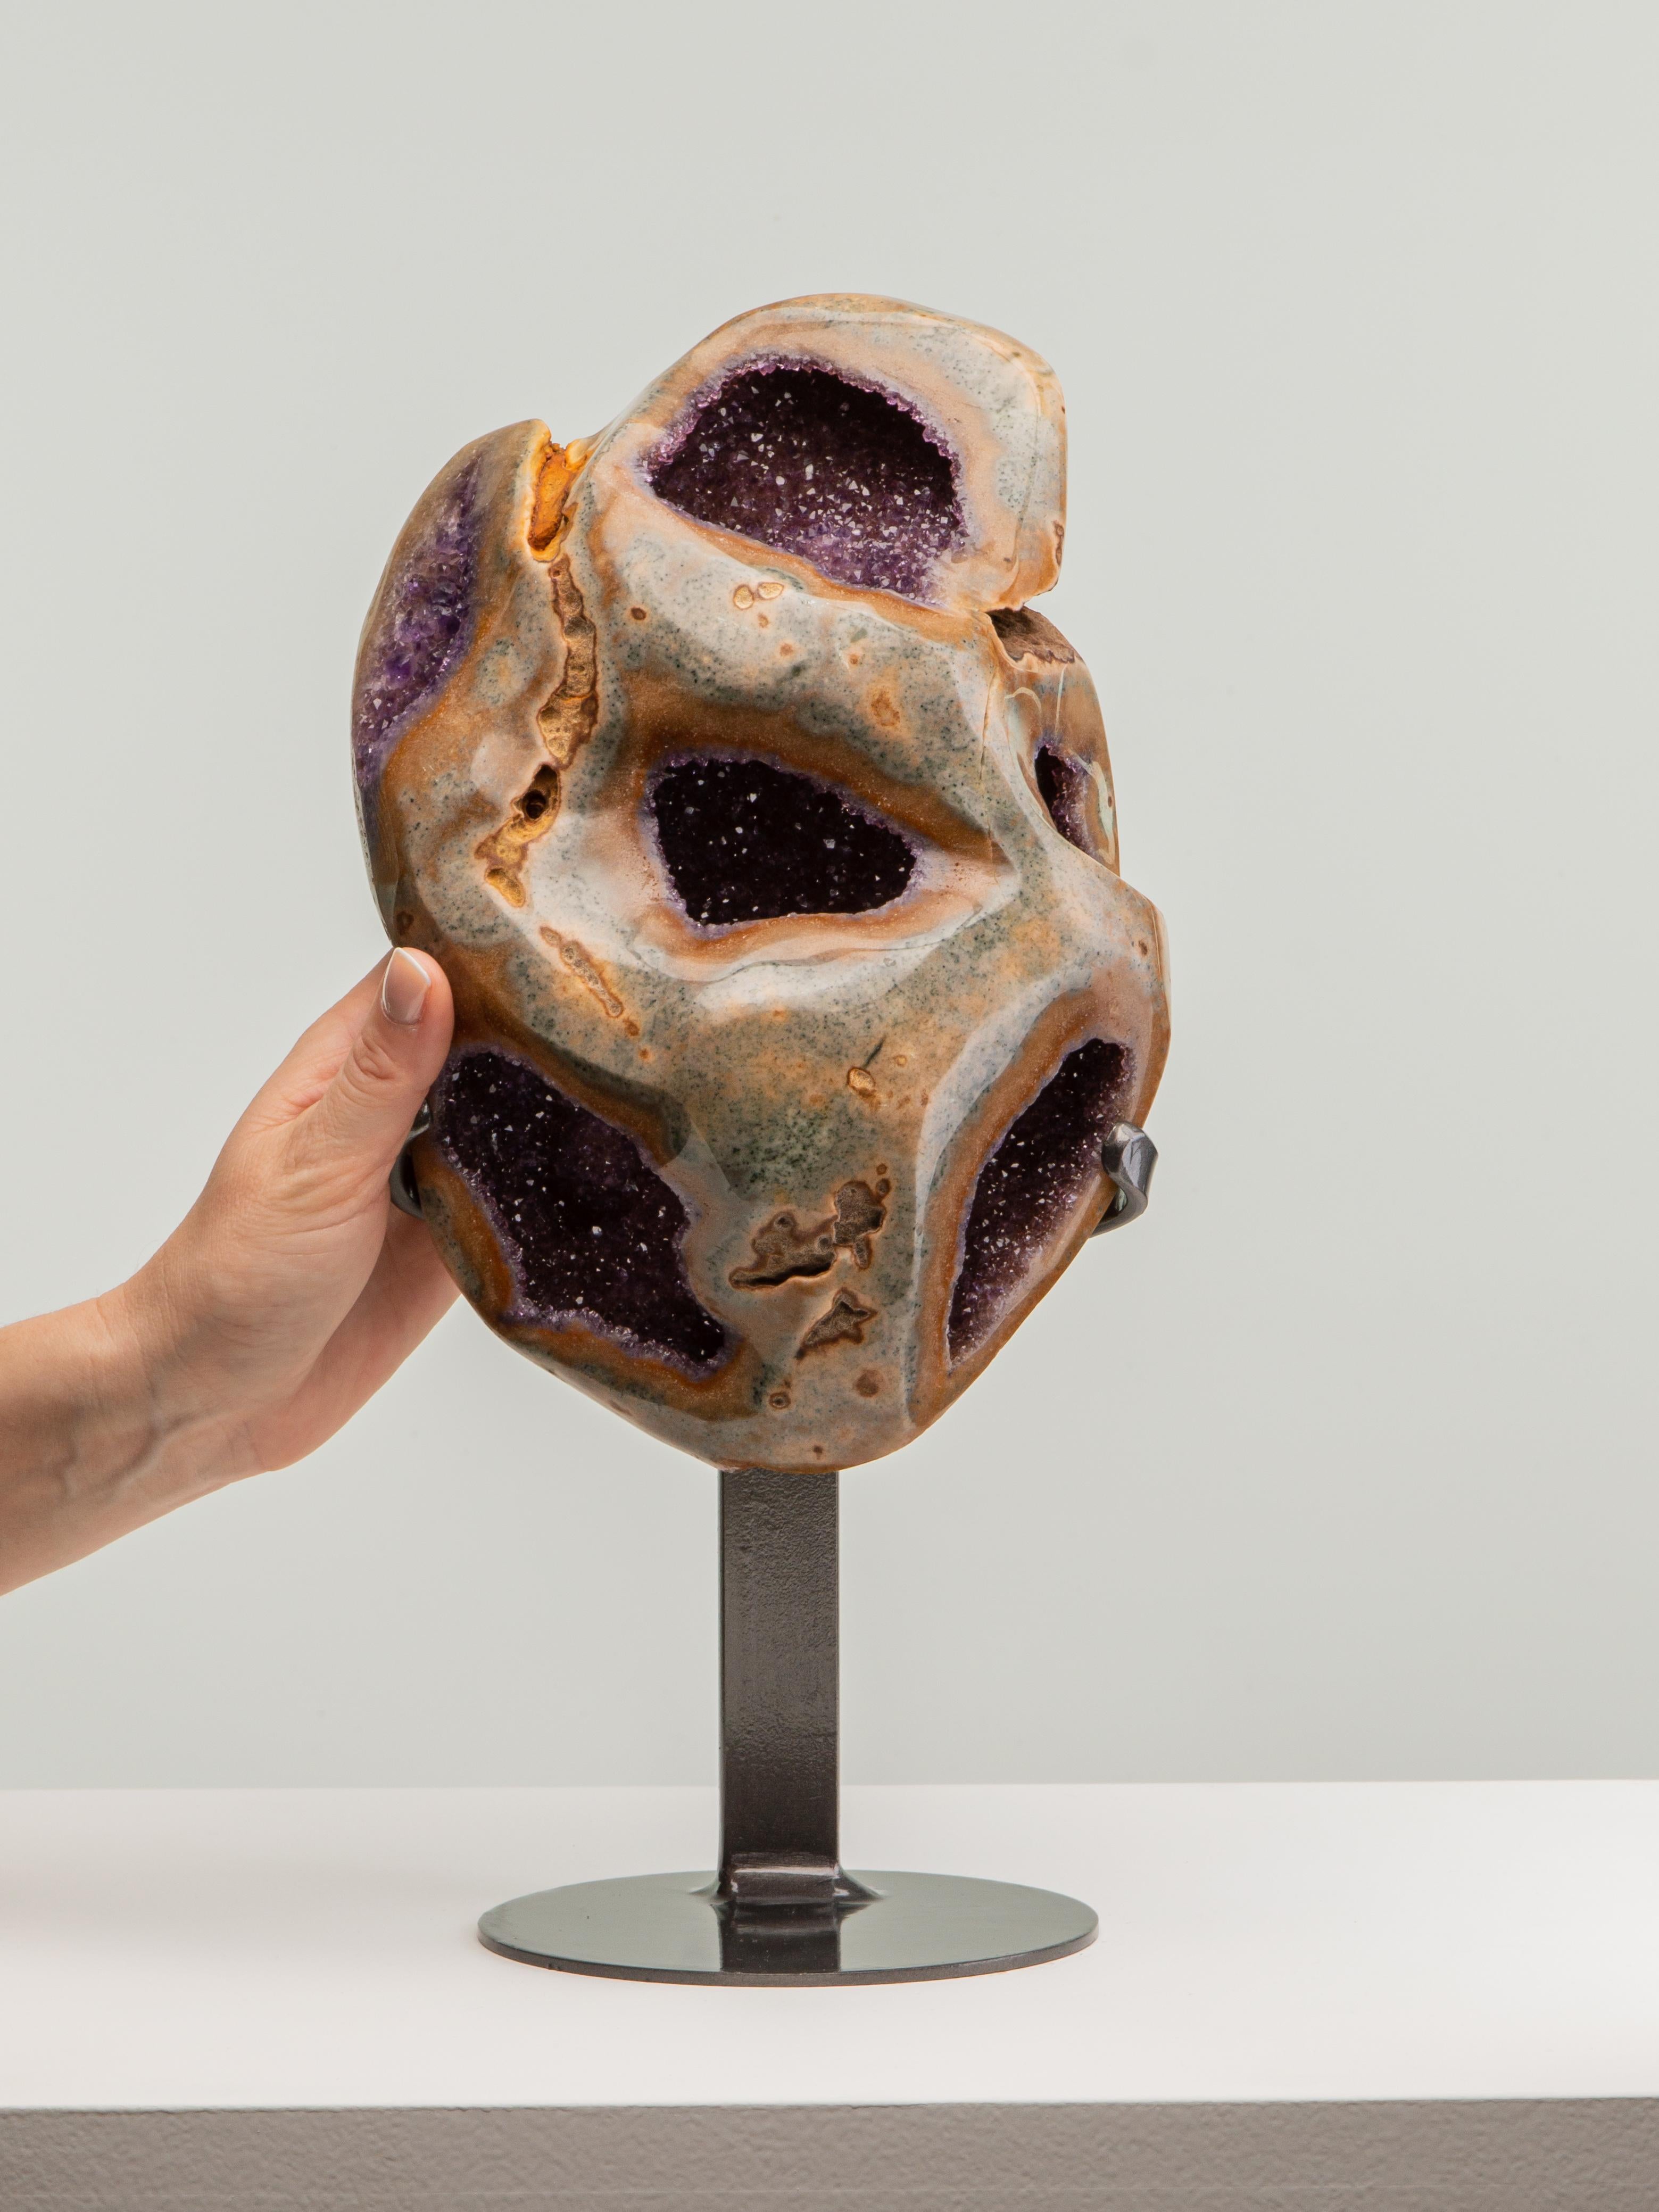 This heavily agatiised medium sized geode contains 6 “windows” from
which the beautiful amethyst interior can be appreciated. A spectacular
display piece.

This piece was legally and ethically sourced directly in the prestigious mines of